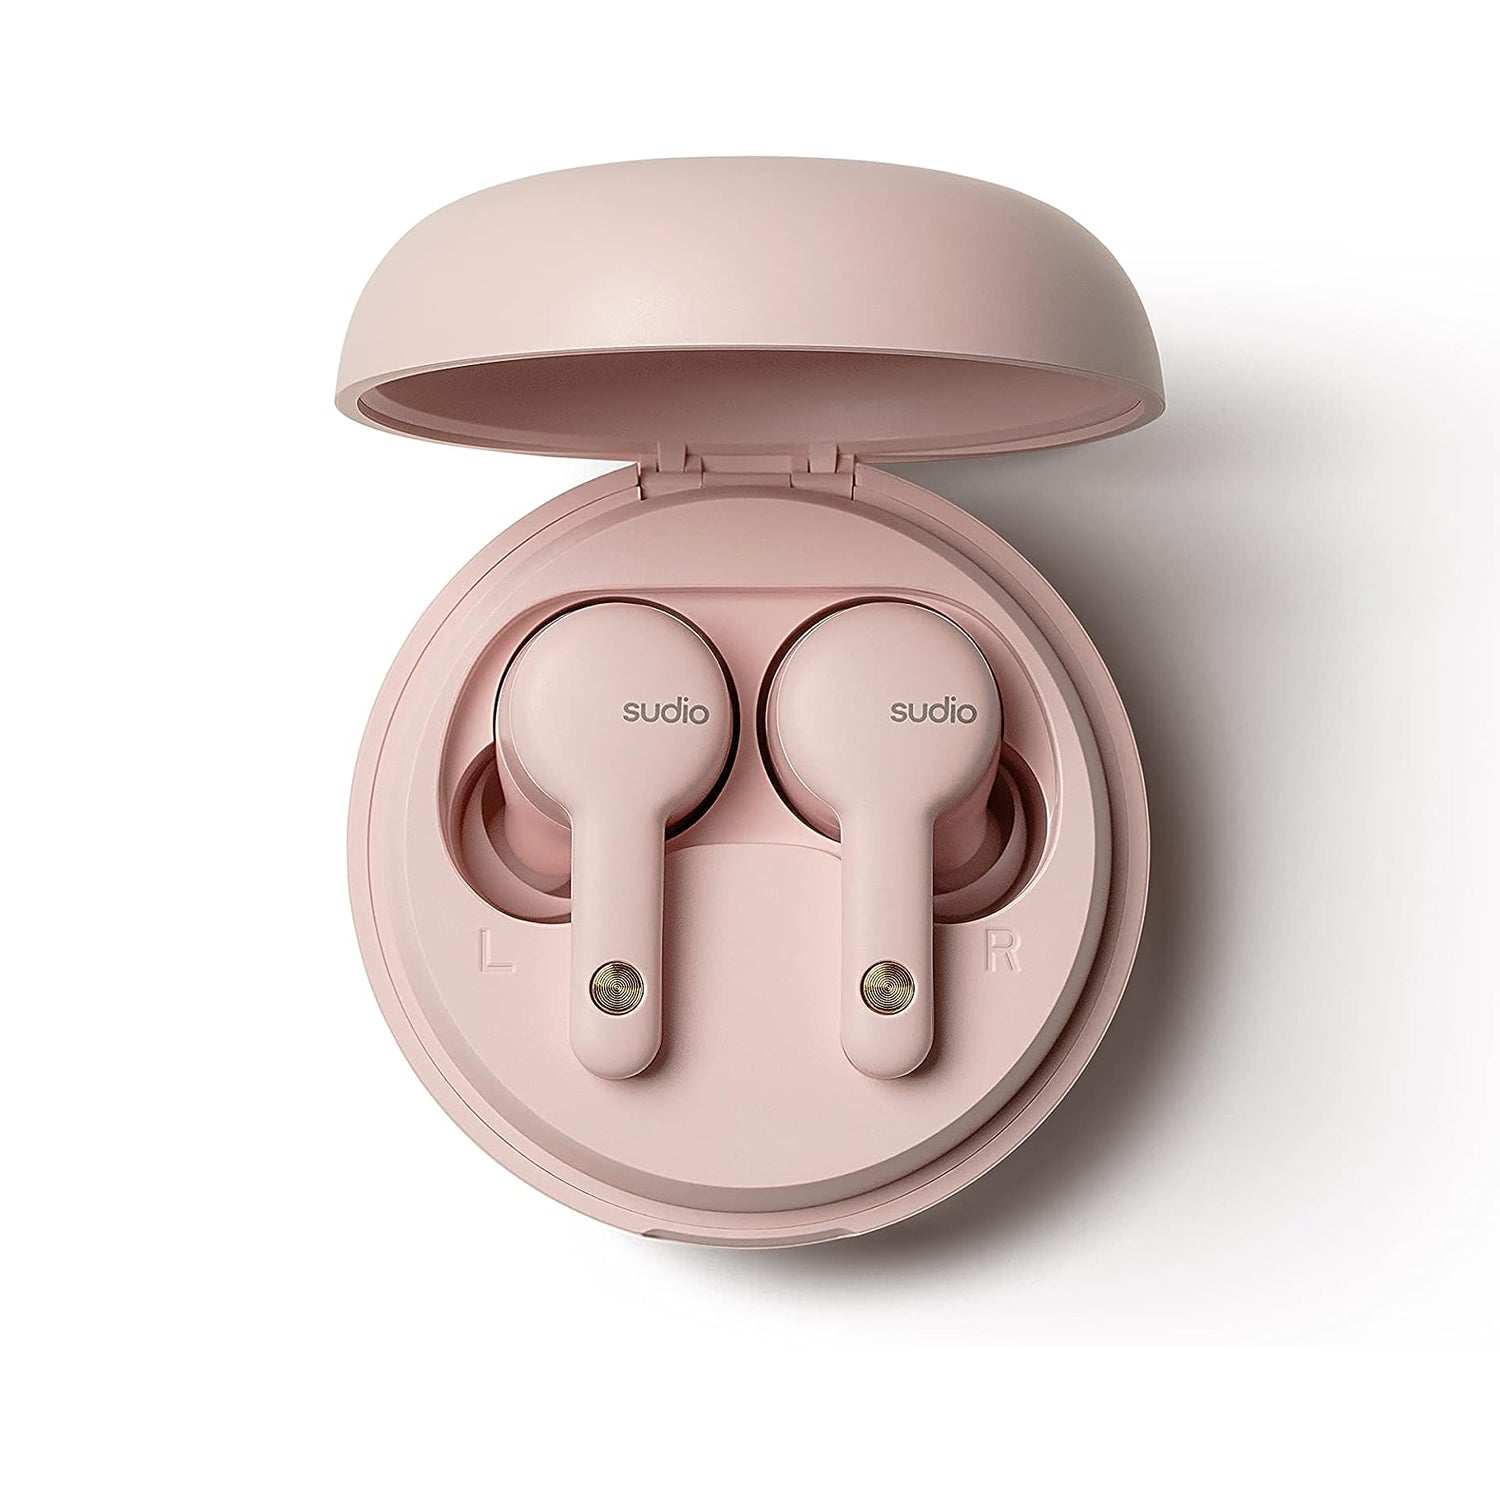 Sudio A2 True Wireless Earbuds with Active Noise Cancellation